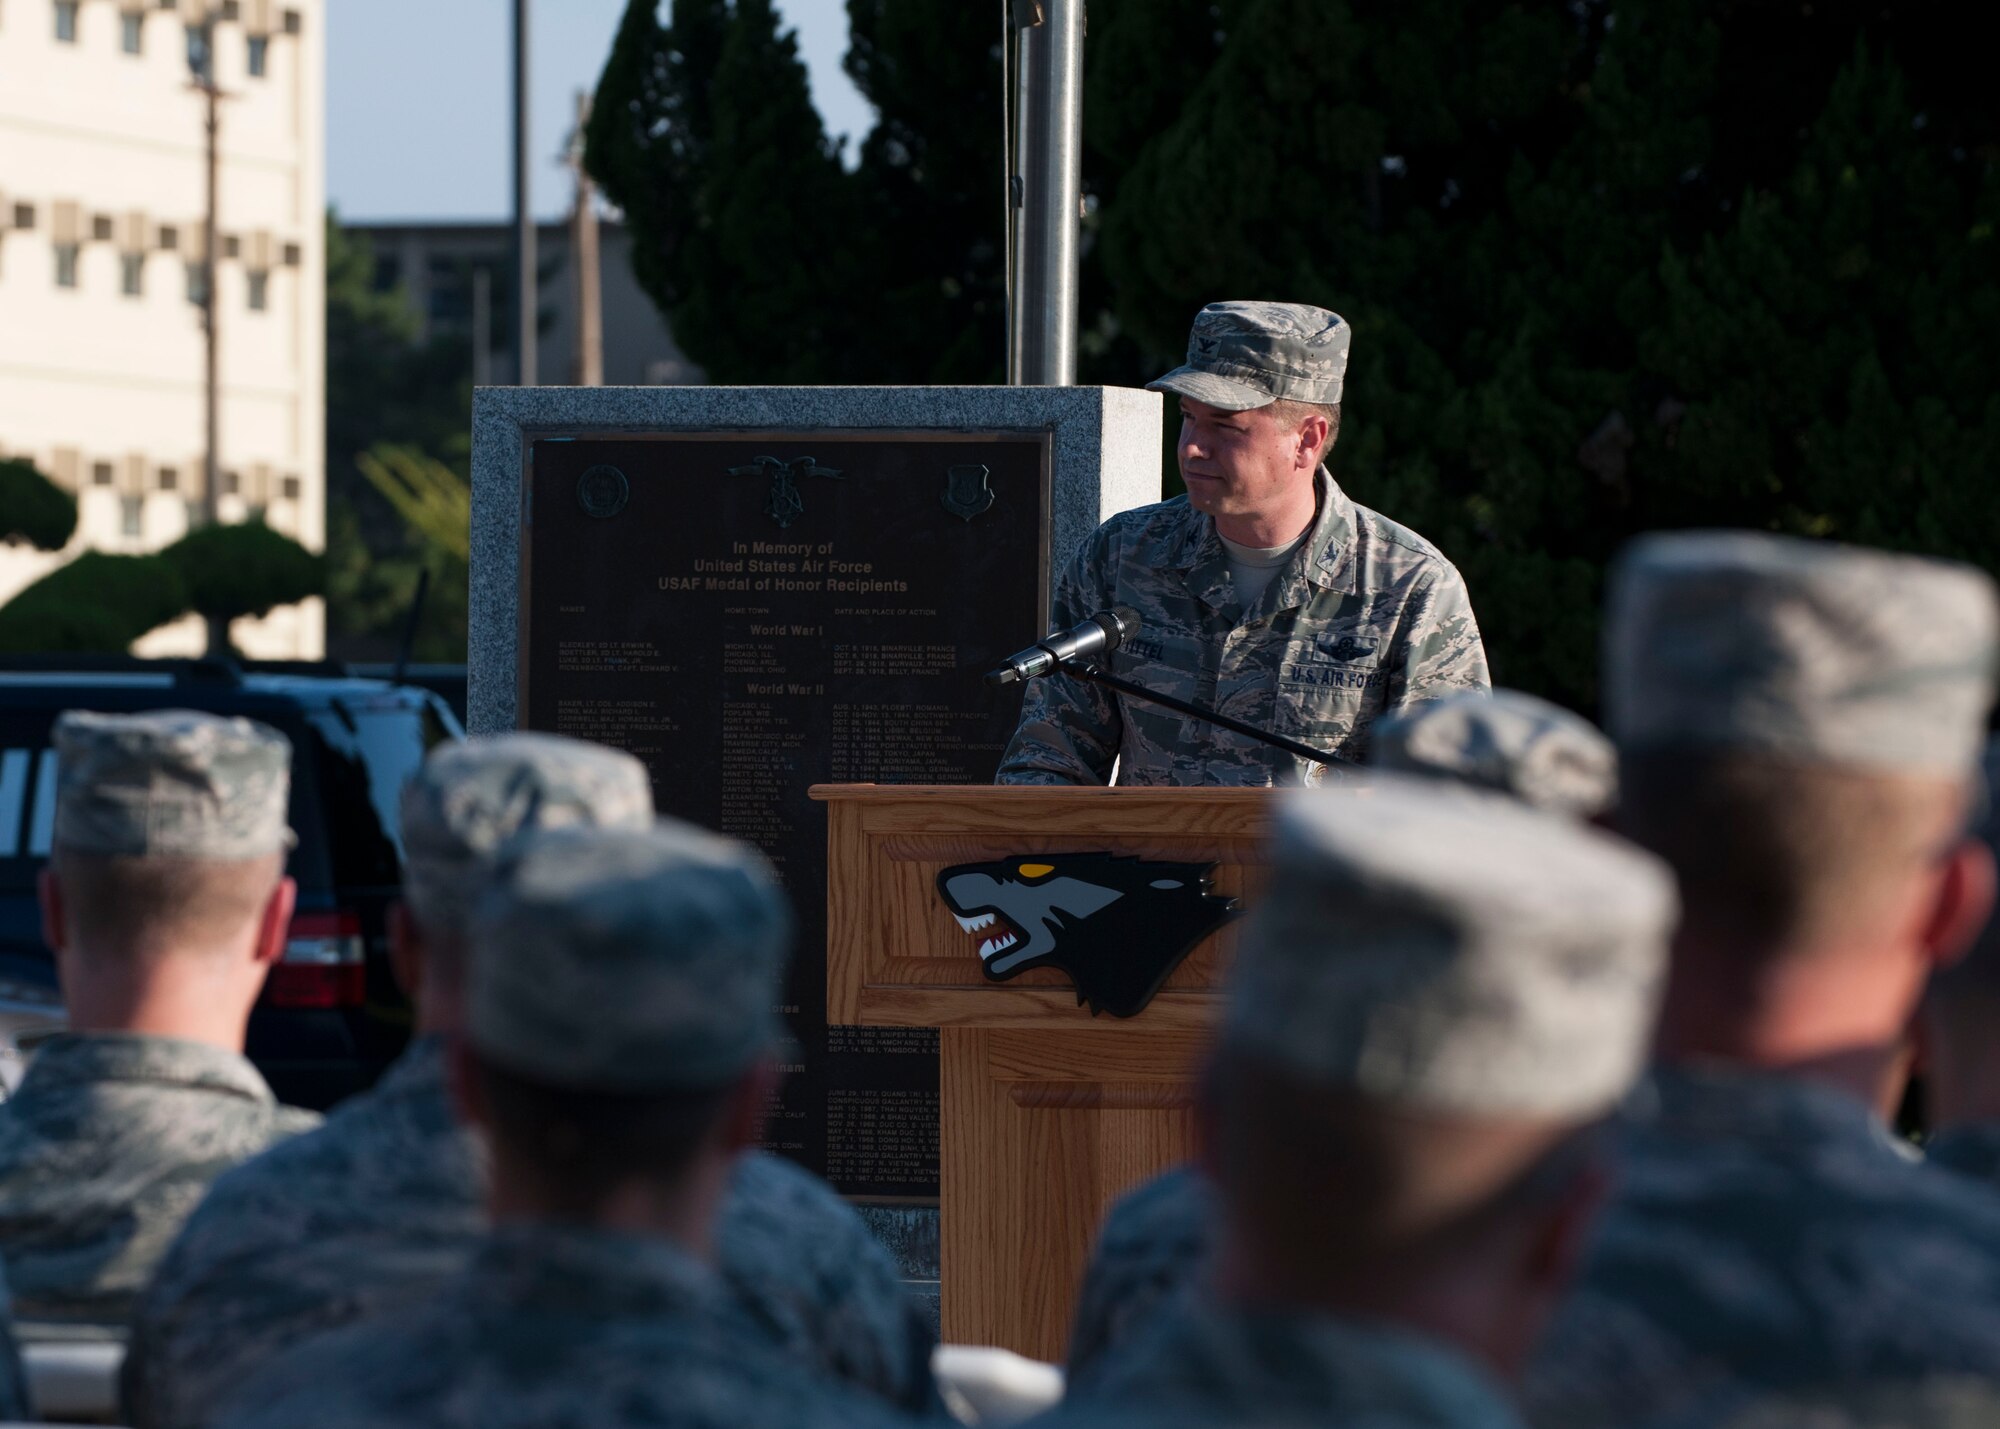 U.S. Air Force Col. Steven J. Tittel, 8th Fighter Wing vice commander, speaks during the opening ceremony of Prisoner of War and Missing in Action Recognition Day at Kunsan Air Base, Republic of Korea, Sept. 14, 2017. This day was established by an Act of Congress, through the passage of Section 1082 of the 1998 Defense Authorization Act and is one of six days that the POW/MIA Flag can be flown. (U.S. Air Force photo by Staff Sgt. Victoria H. Taylor)